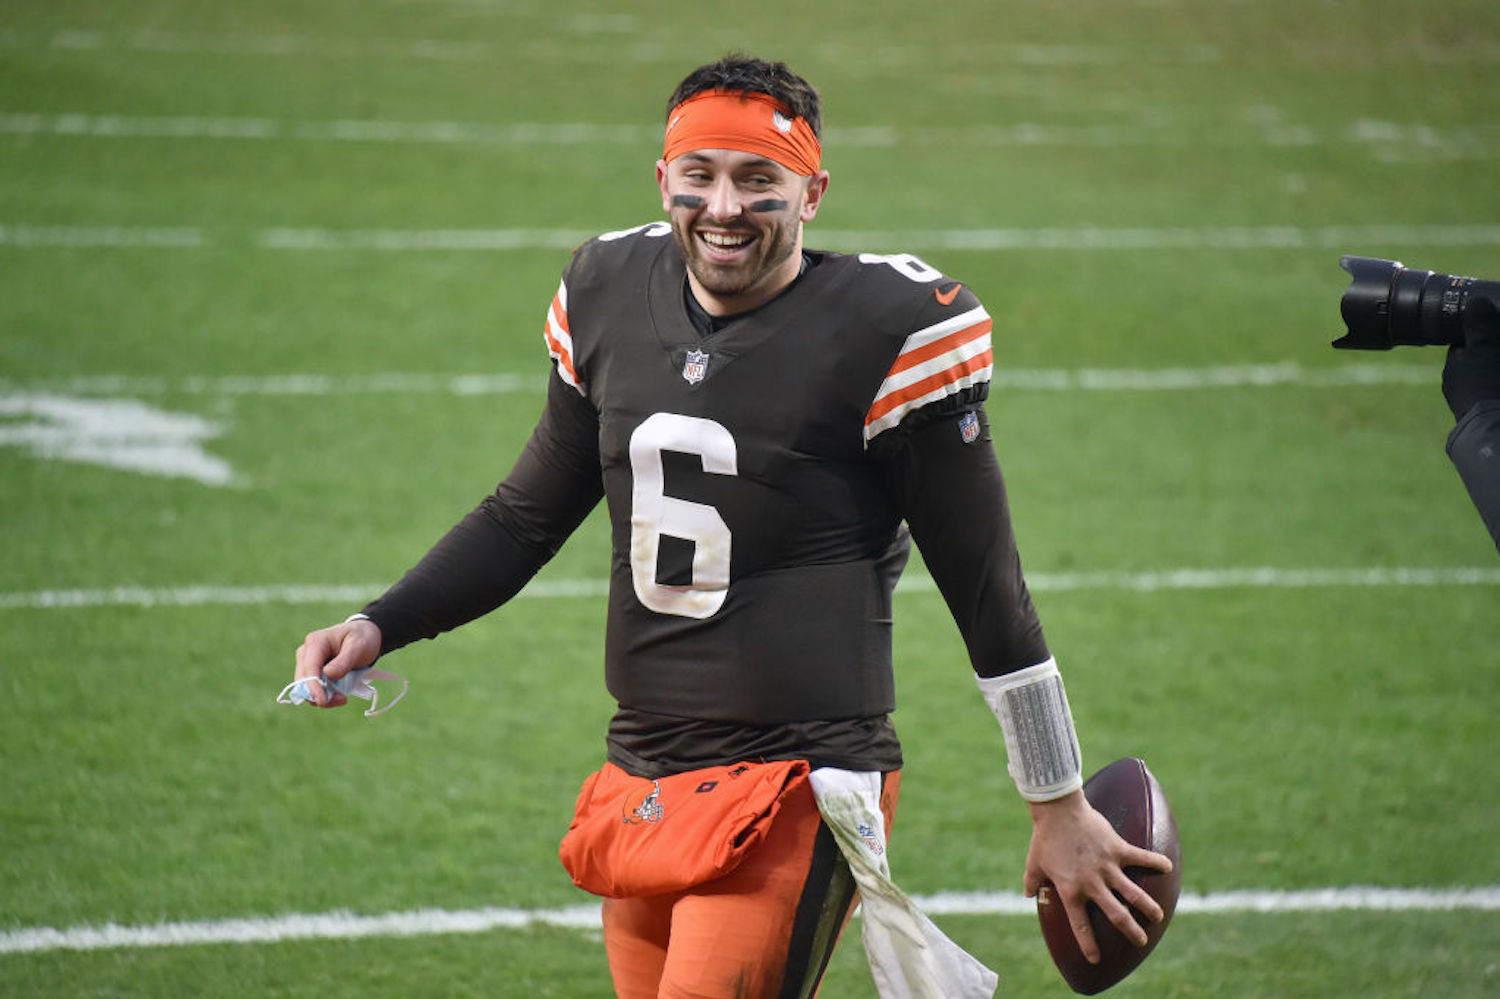 Colin Cowherd has never been a believer in Baker Mayfield, so the Browns clapped back at the Fox Sports host with a genius play call.